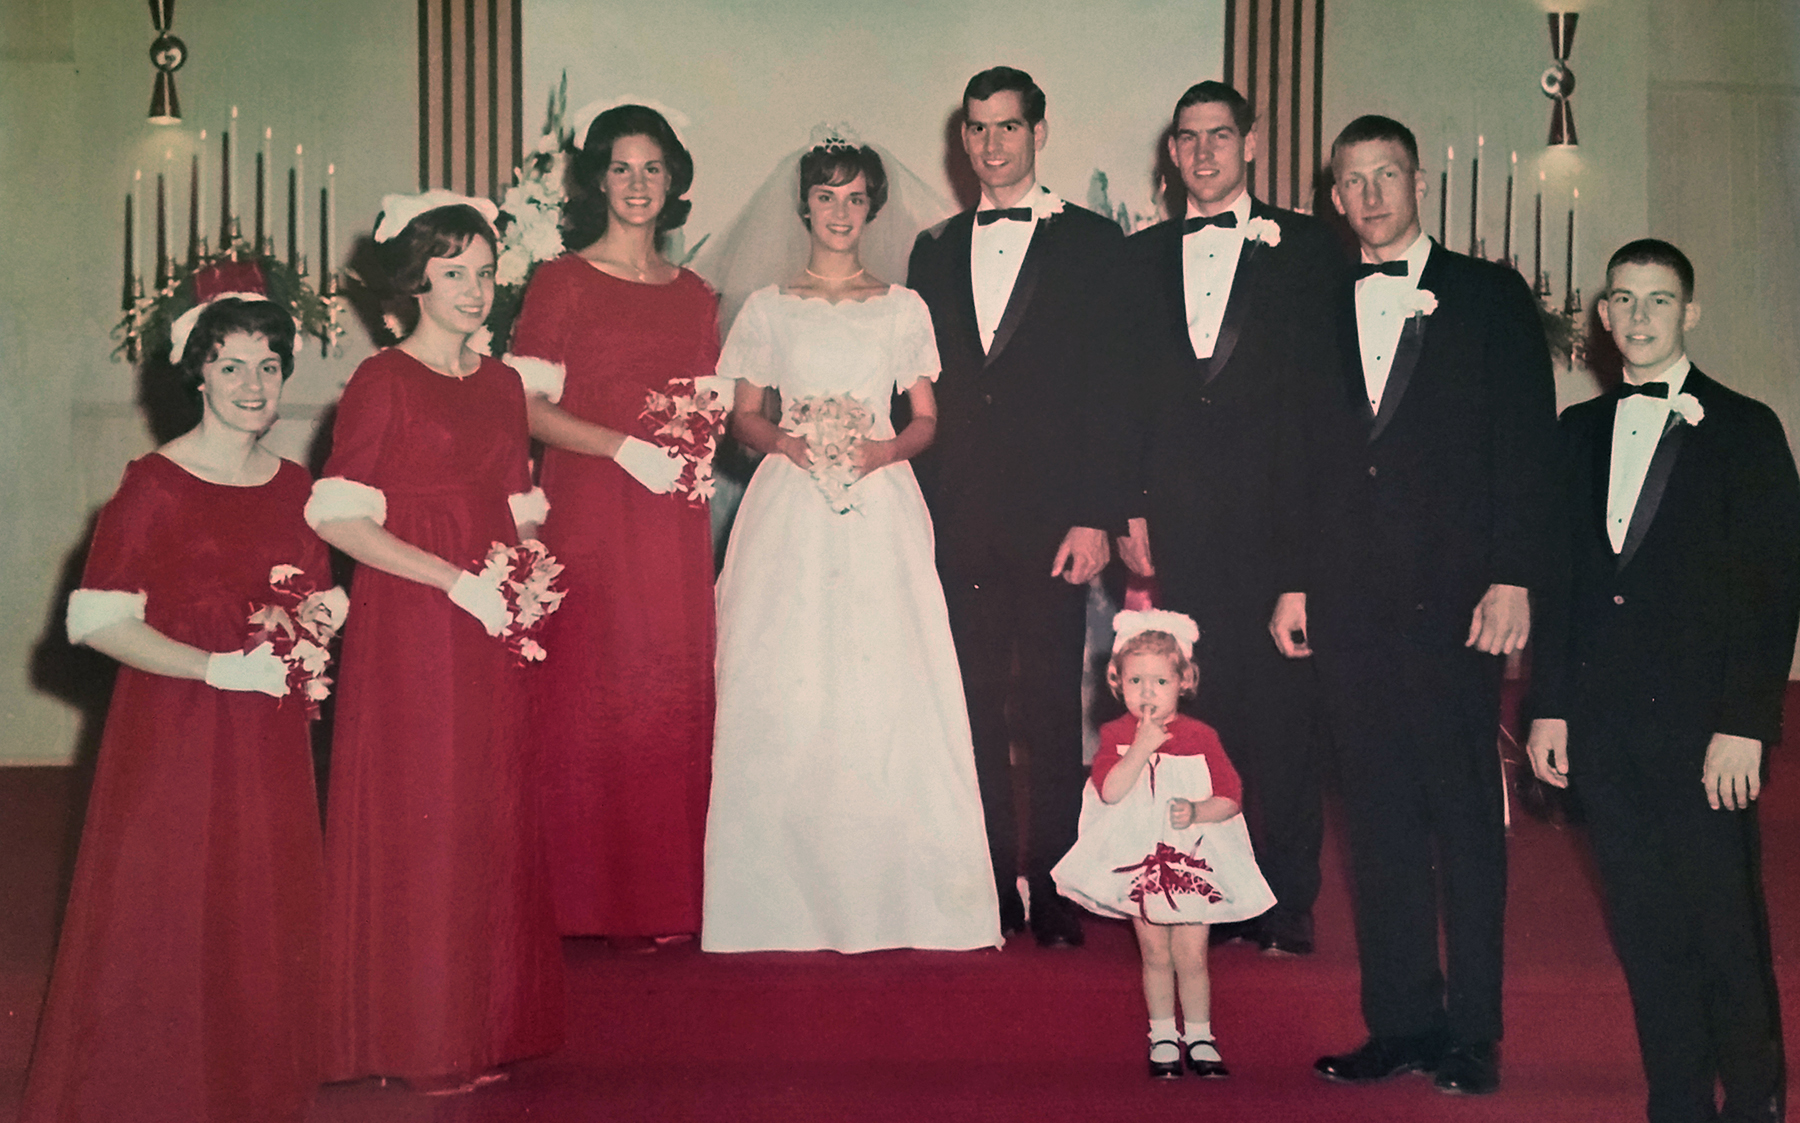 PHOTO: Sandy and Jim Zahn are celebrating their 50th anniversary at the same hotel where they stayed on their Dec. 22, 1966 wedding night. The wedding party.